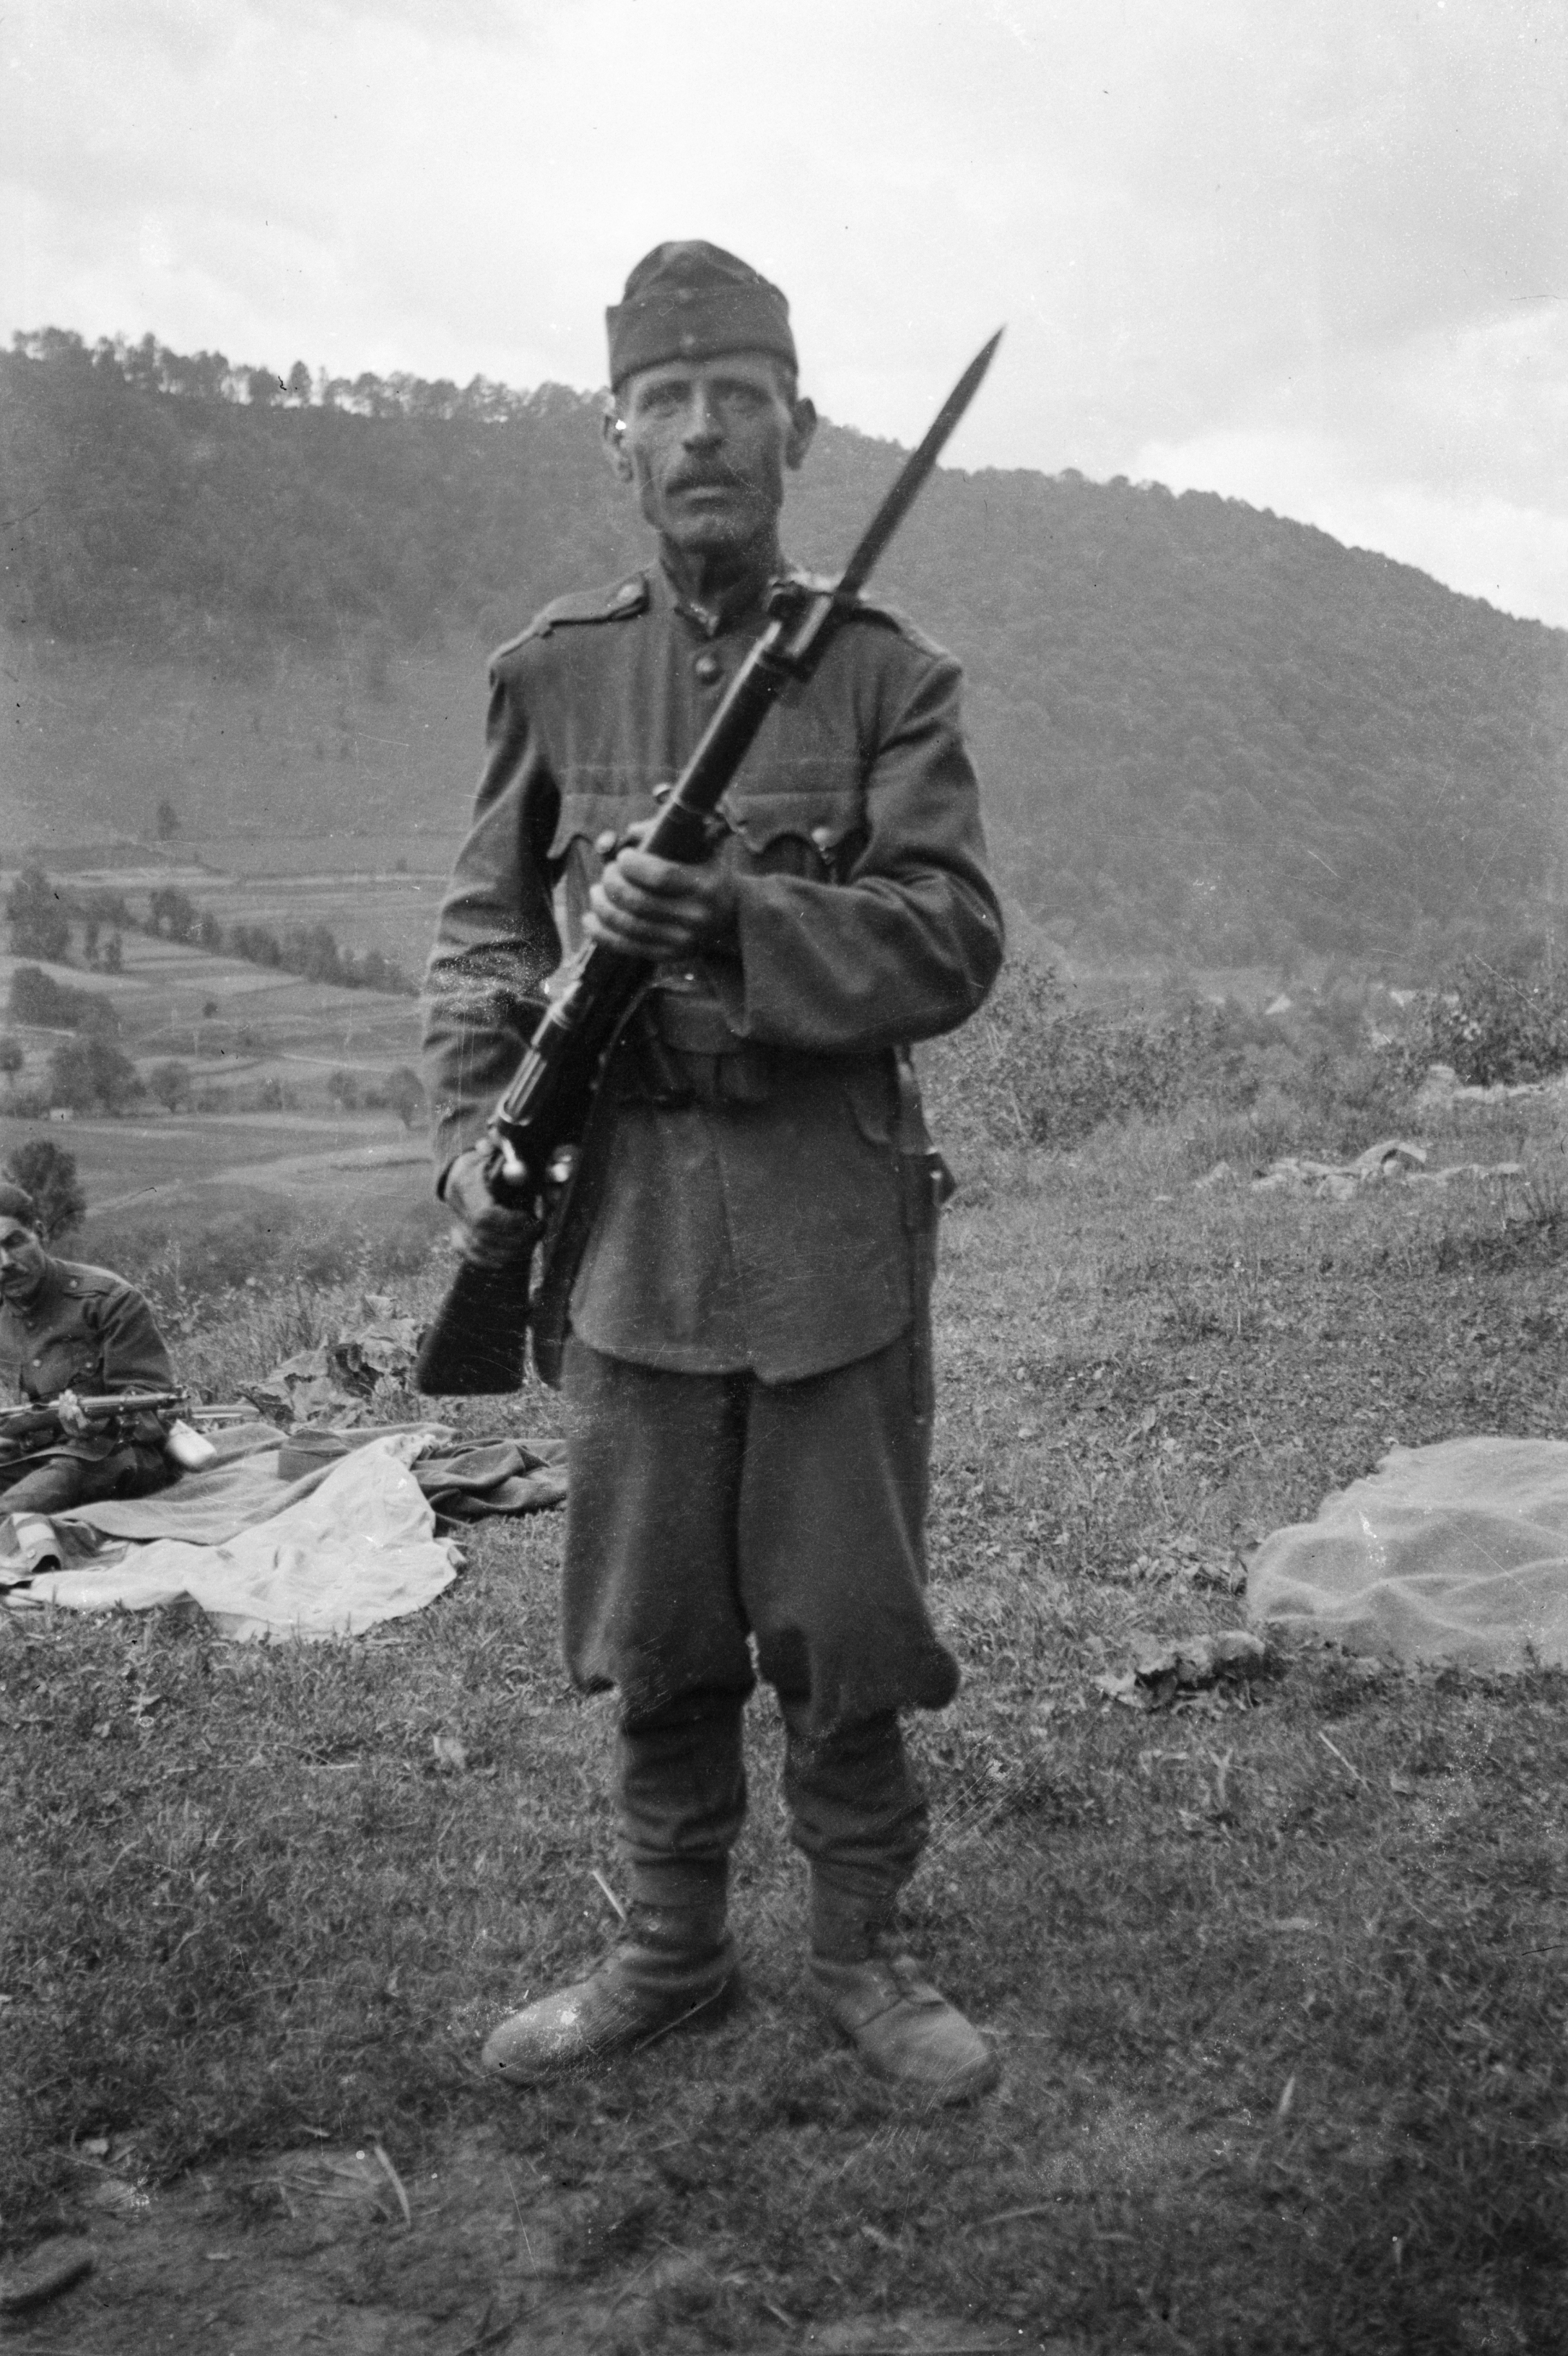 Hungarian soldier with Steyr-Mannlicher M1895 rifle in the Carpathian Mountains, 1940